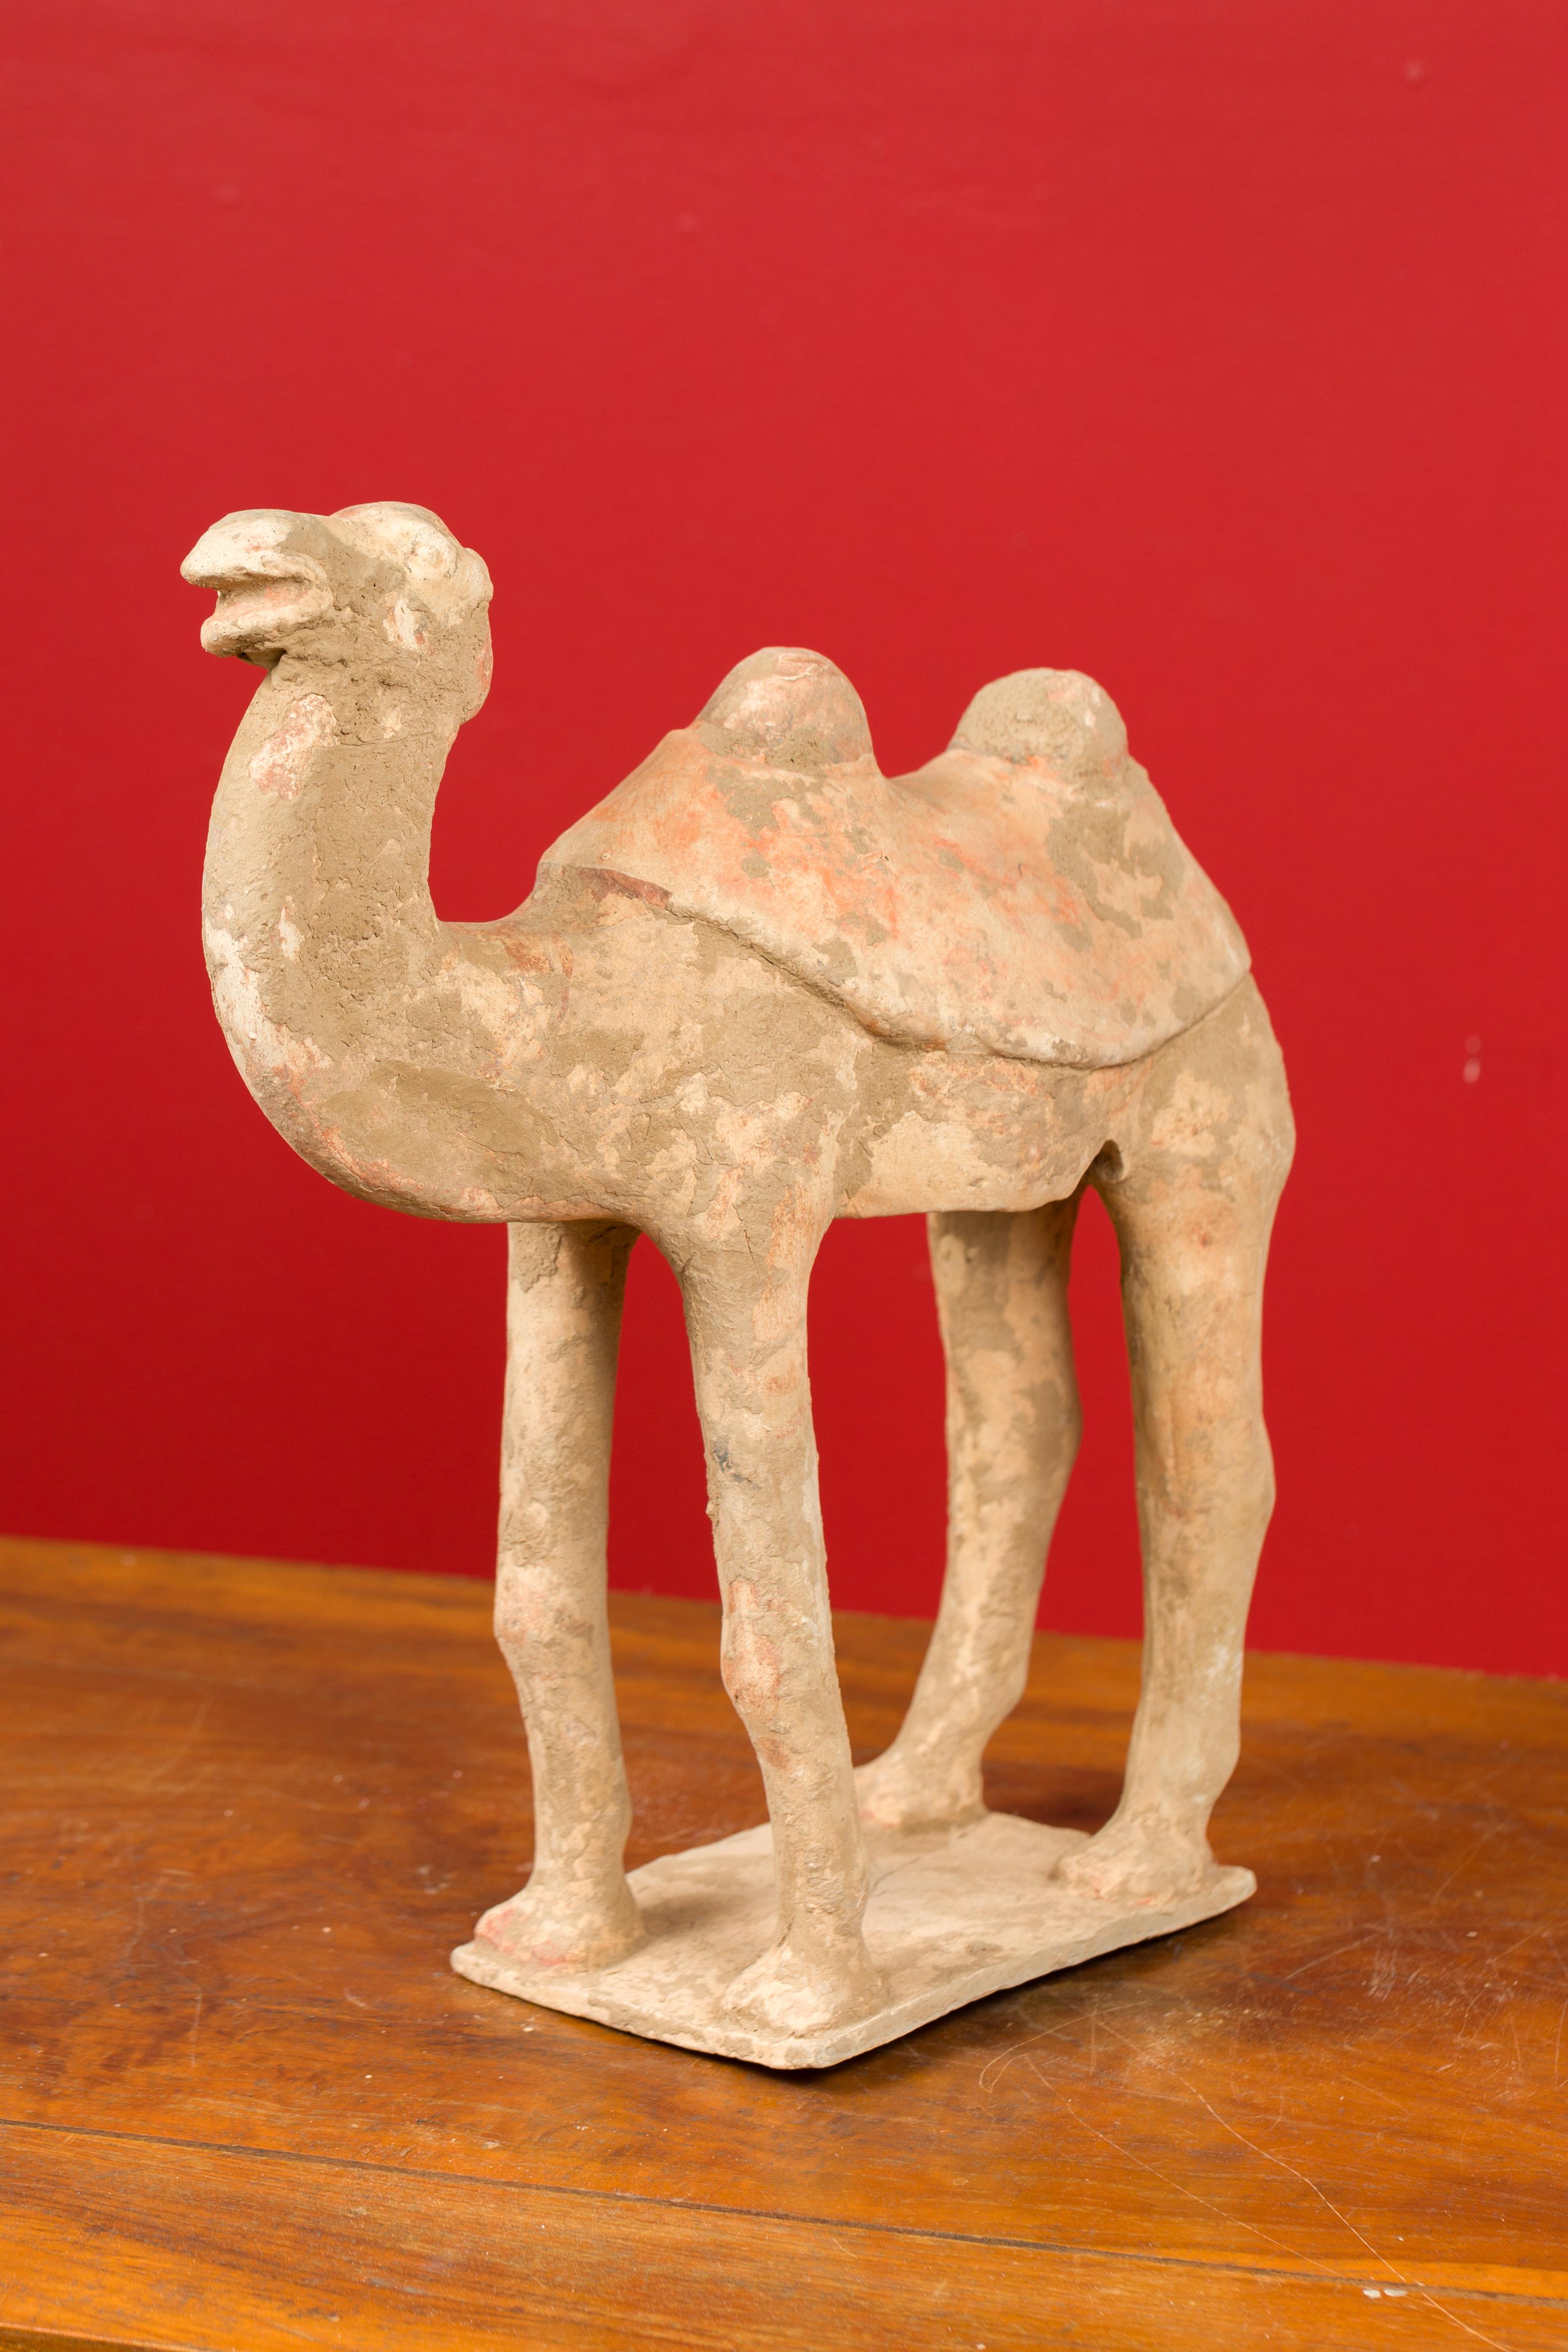 Chinese Han Dynasty 202 BC-200 AD Mingqi Camel with Original Orange Paint 2